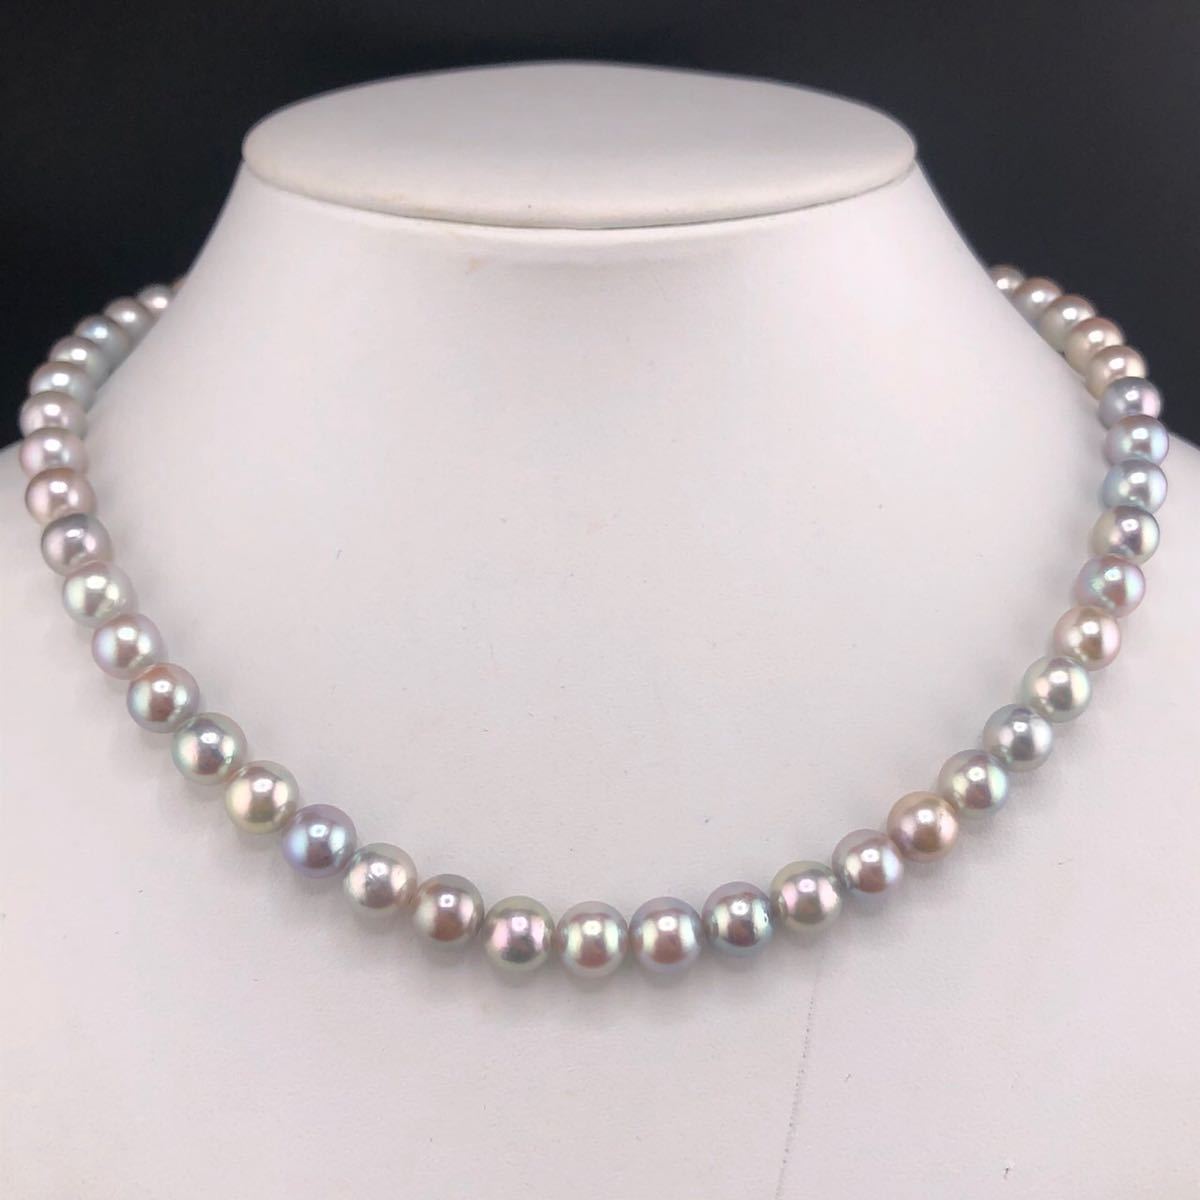 E10-0061 鑑別書付き☆アコヤパールネックレス 7.5mm~8.0mm 42cm 36.4g (アコヤ真珠 Pearl necklace SILVER )